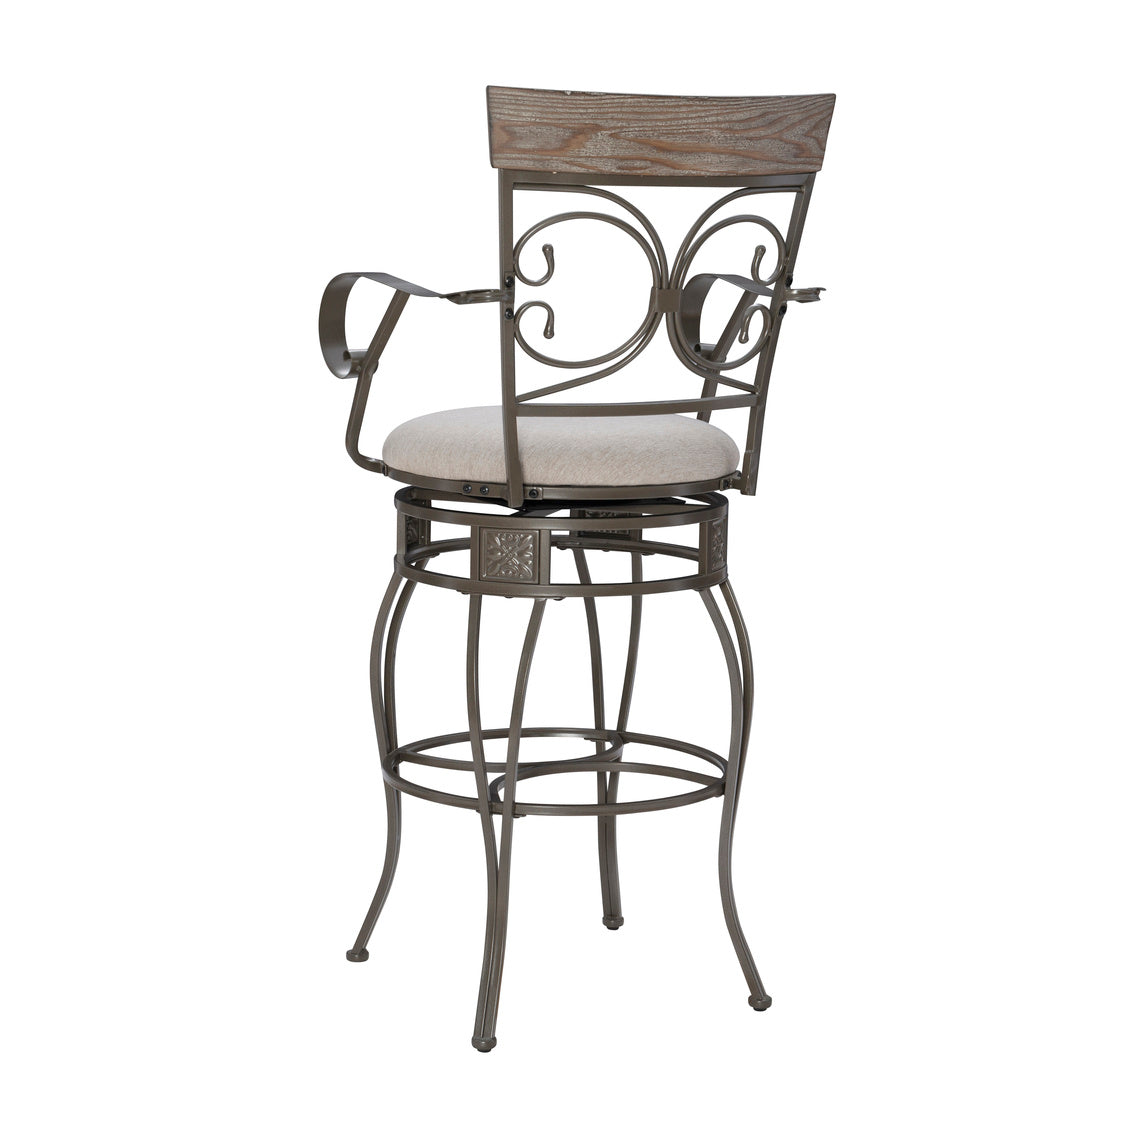 Brea Pewter Swivel Metal Counter Stool with Arms